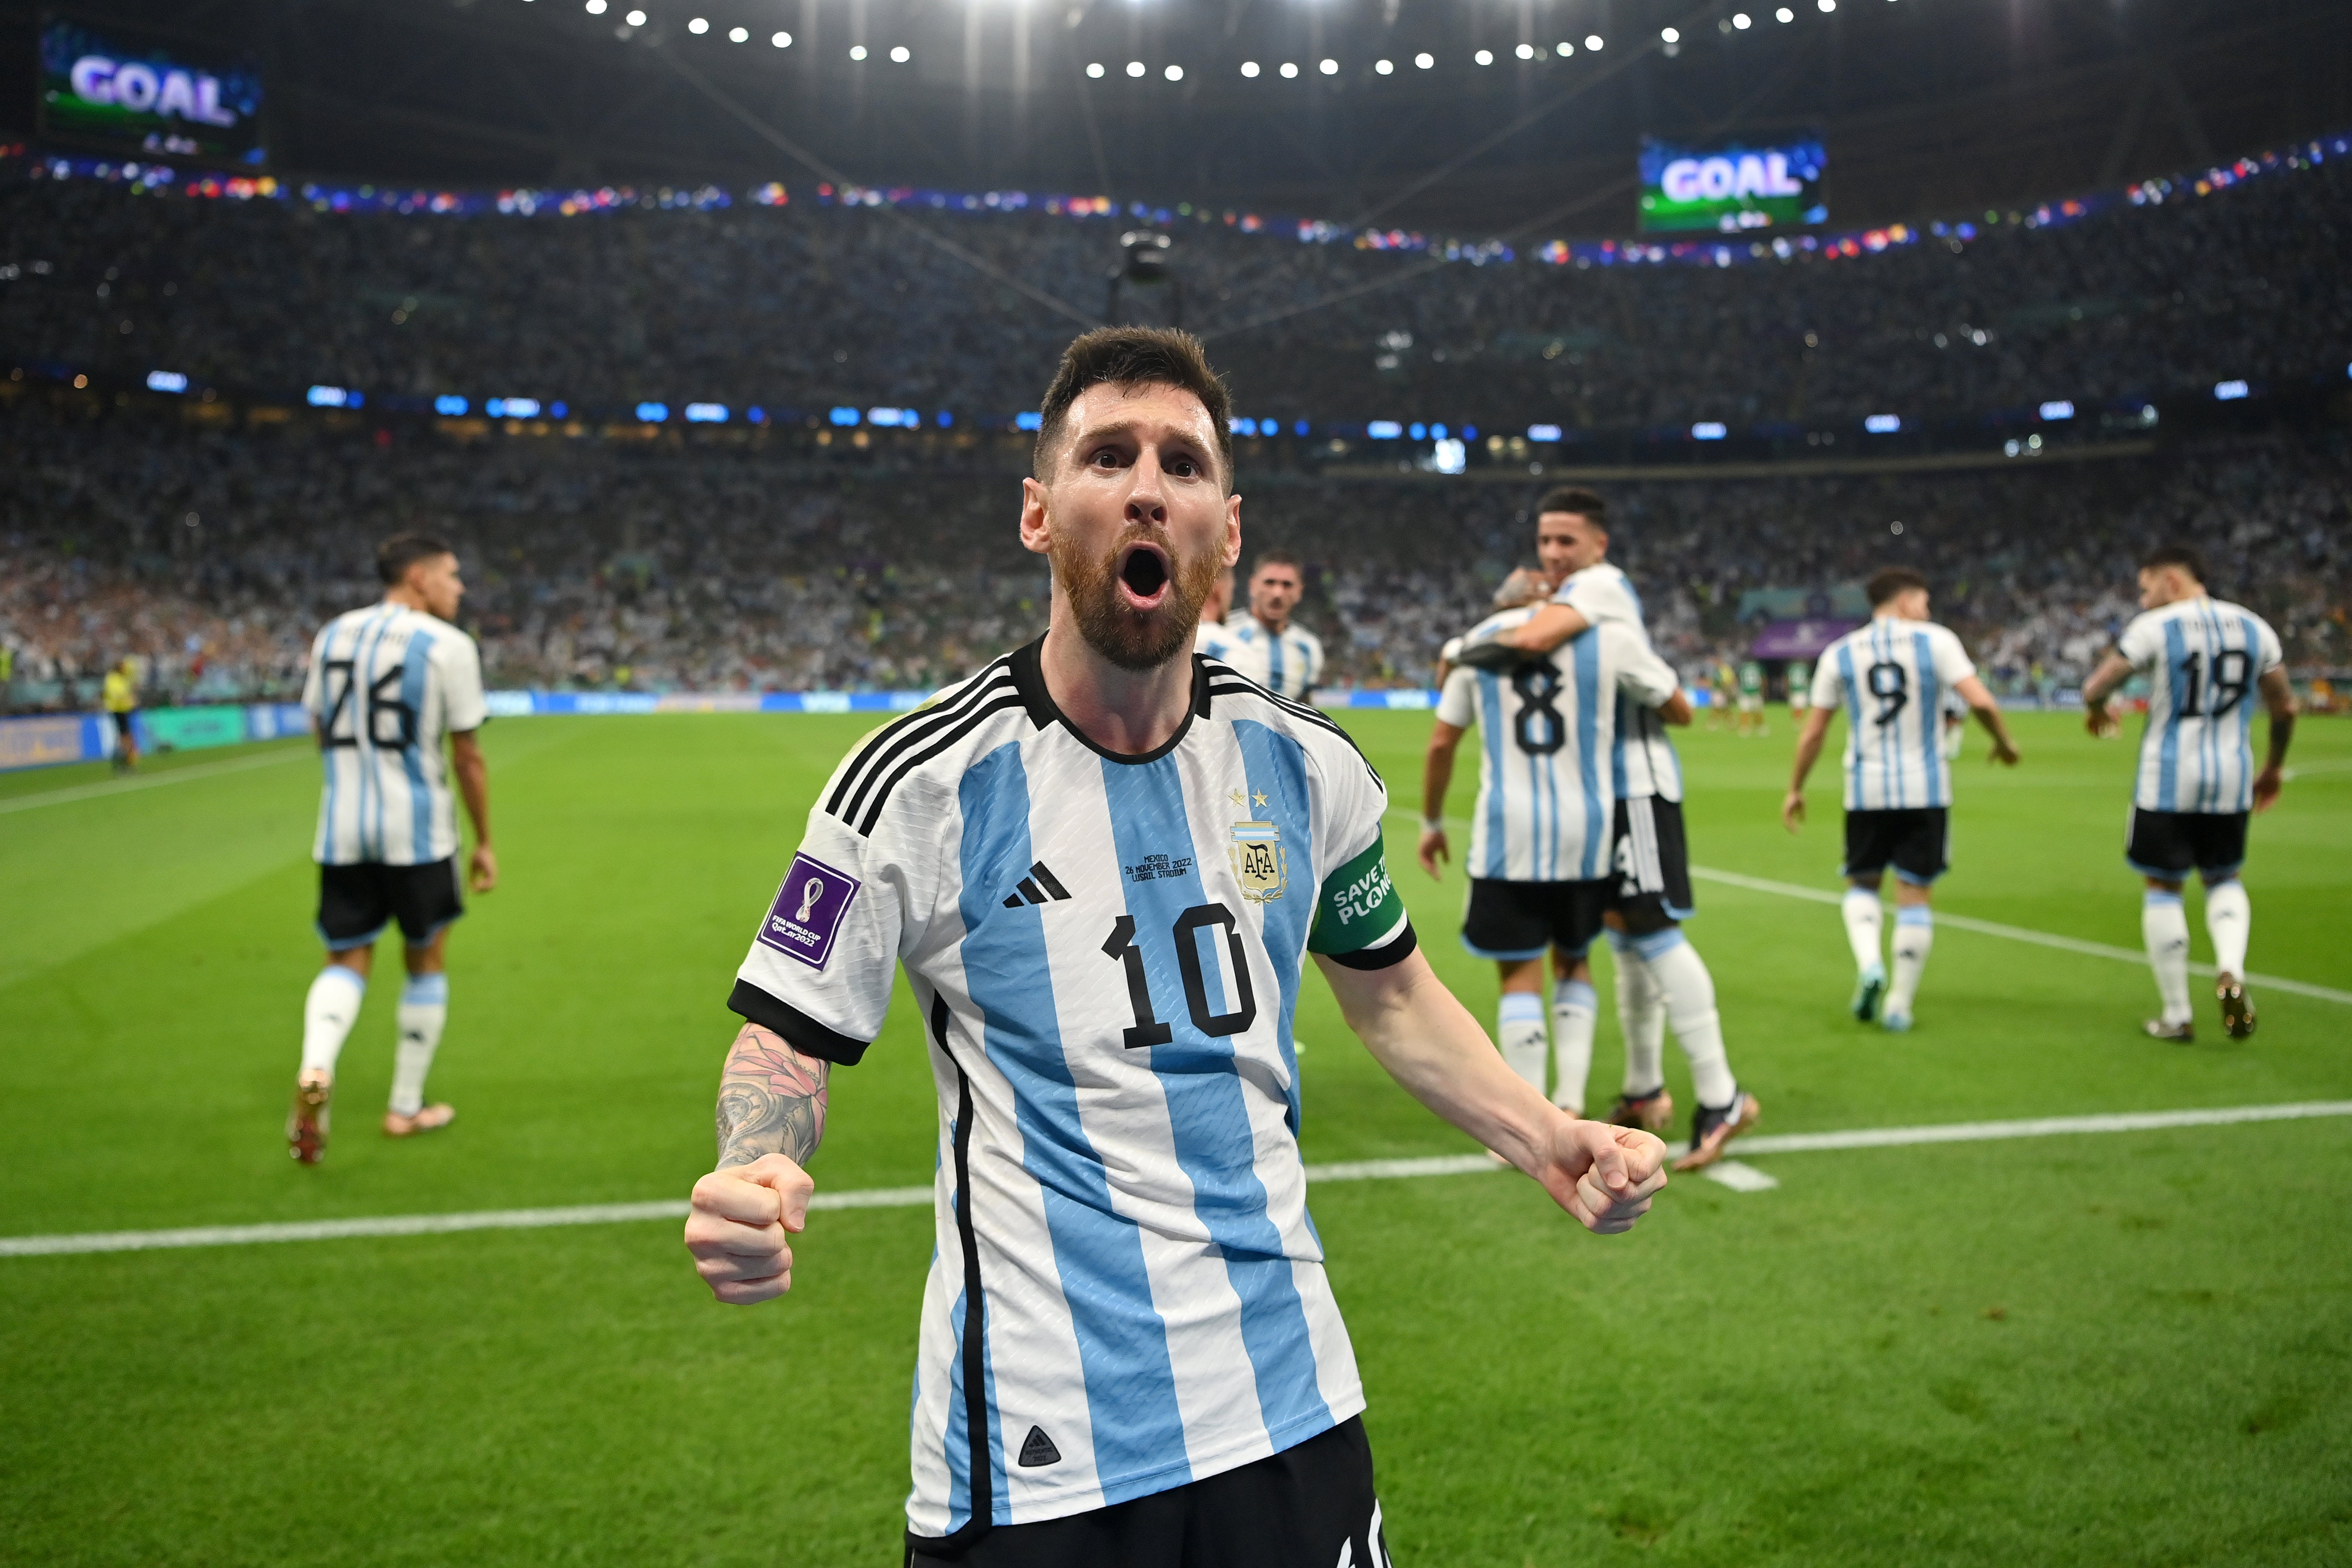 Lionel Messi provided the moment of magic that got Argentina on the board